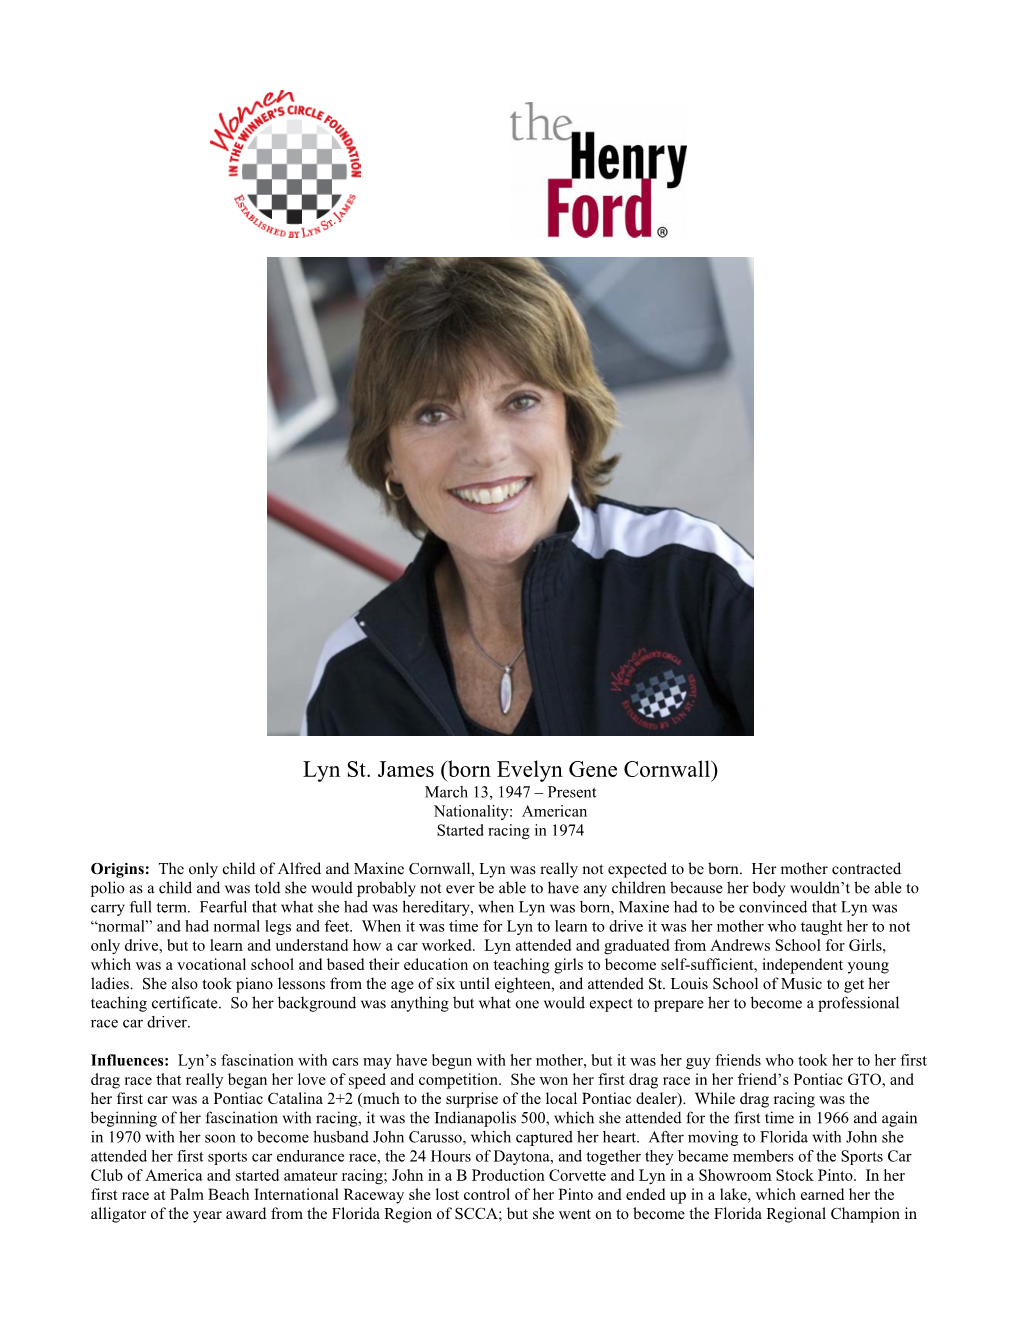 Lyn St. James (Born Evelyn Gene Cornwall) March 13, 1947 – Present Nationality: American Started Racing in 1974